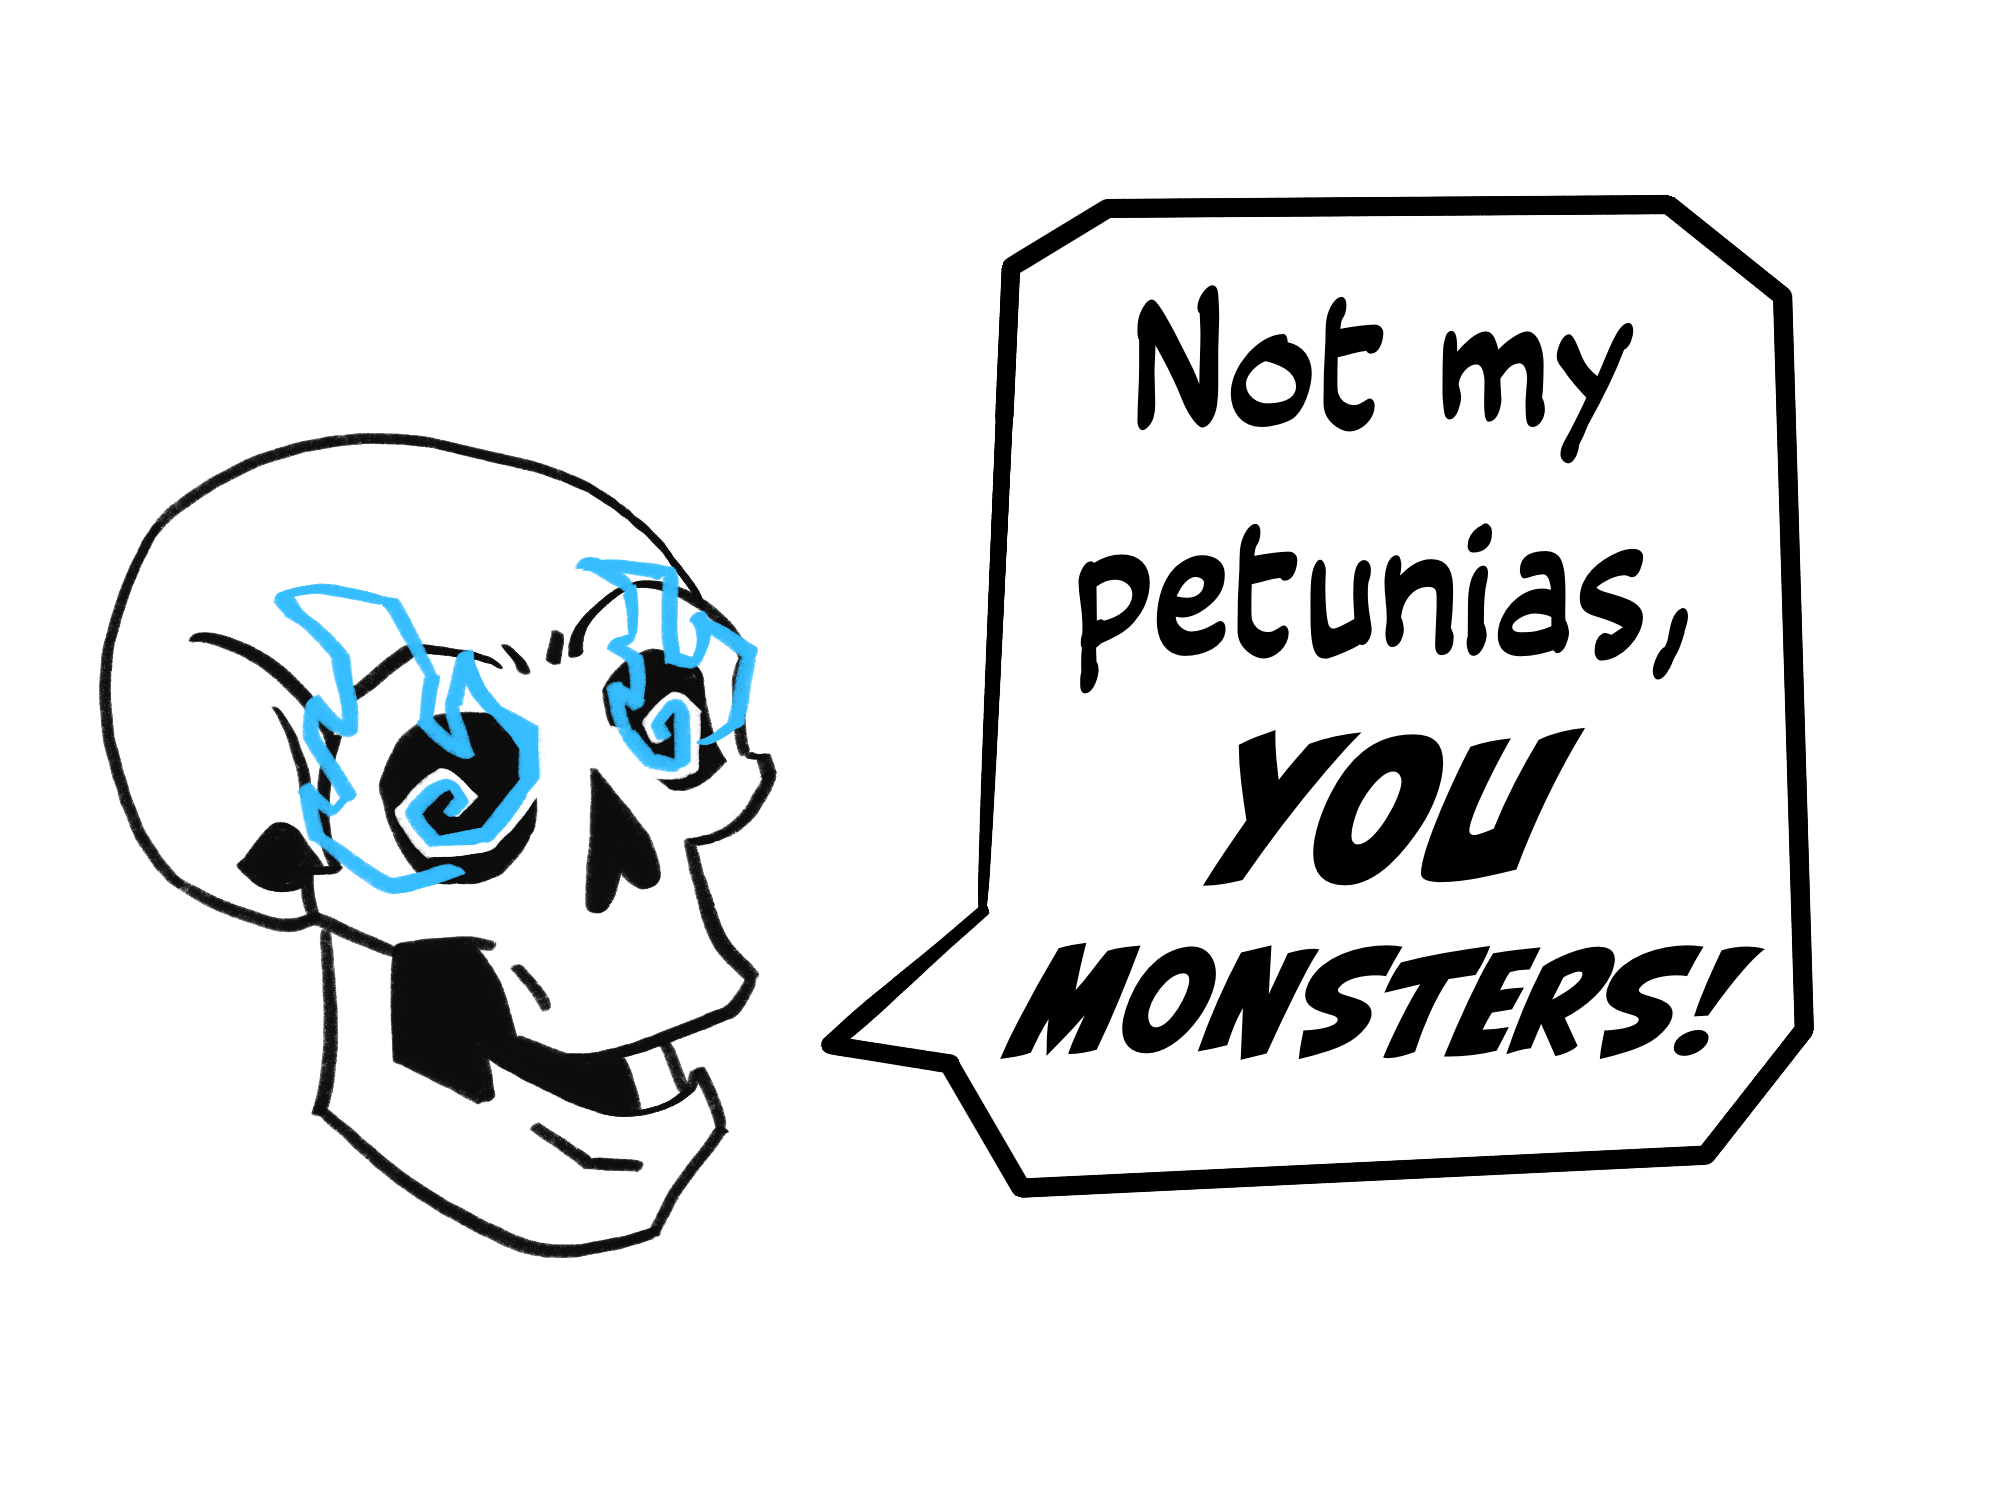 A skull yells about his flowers.